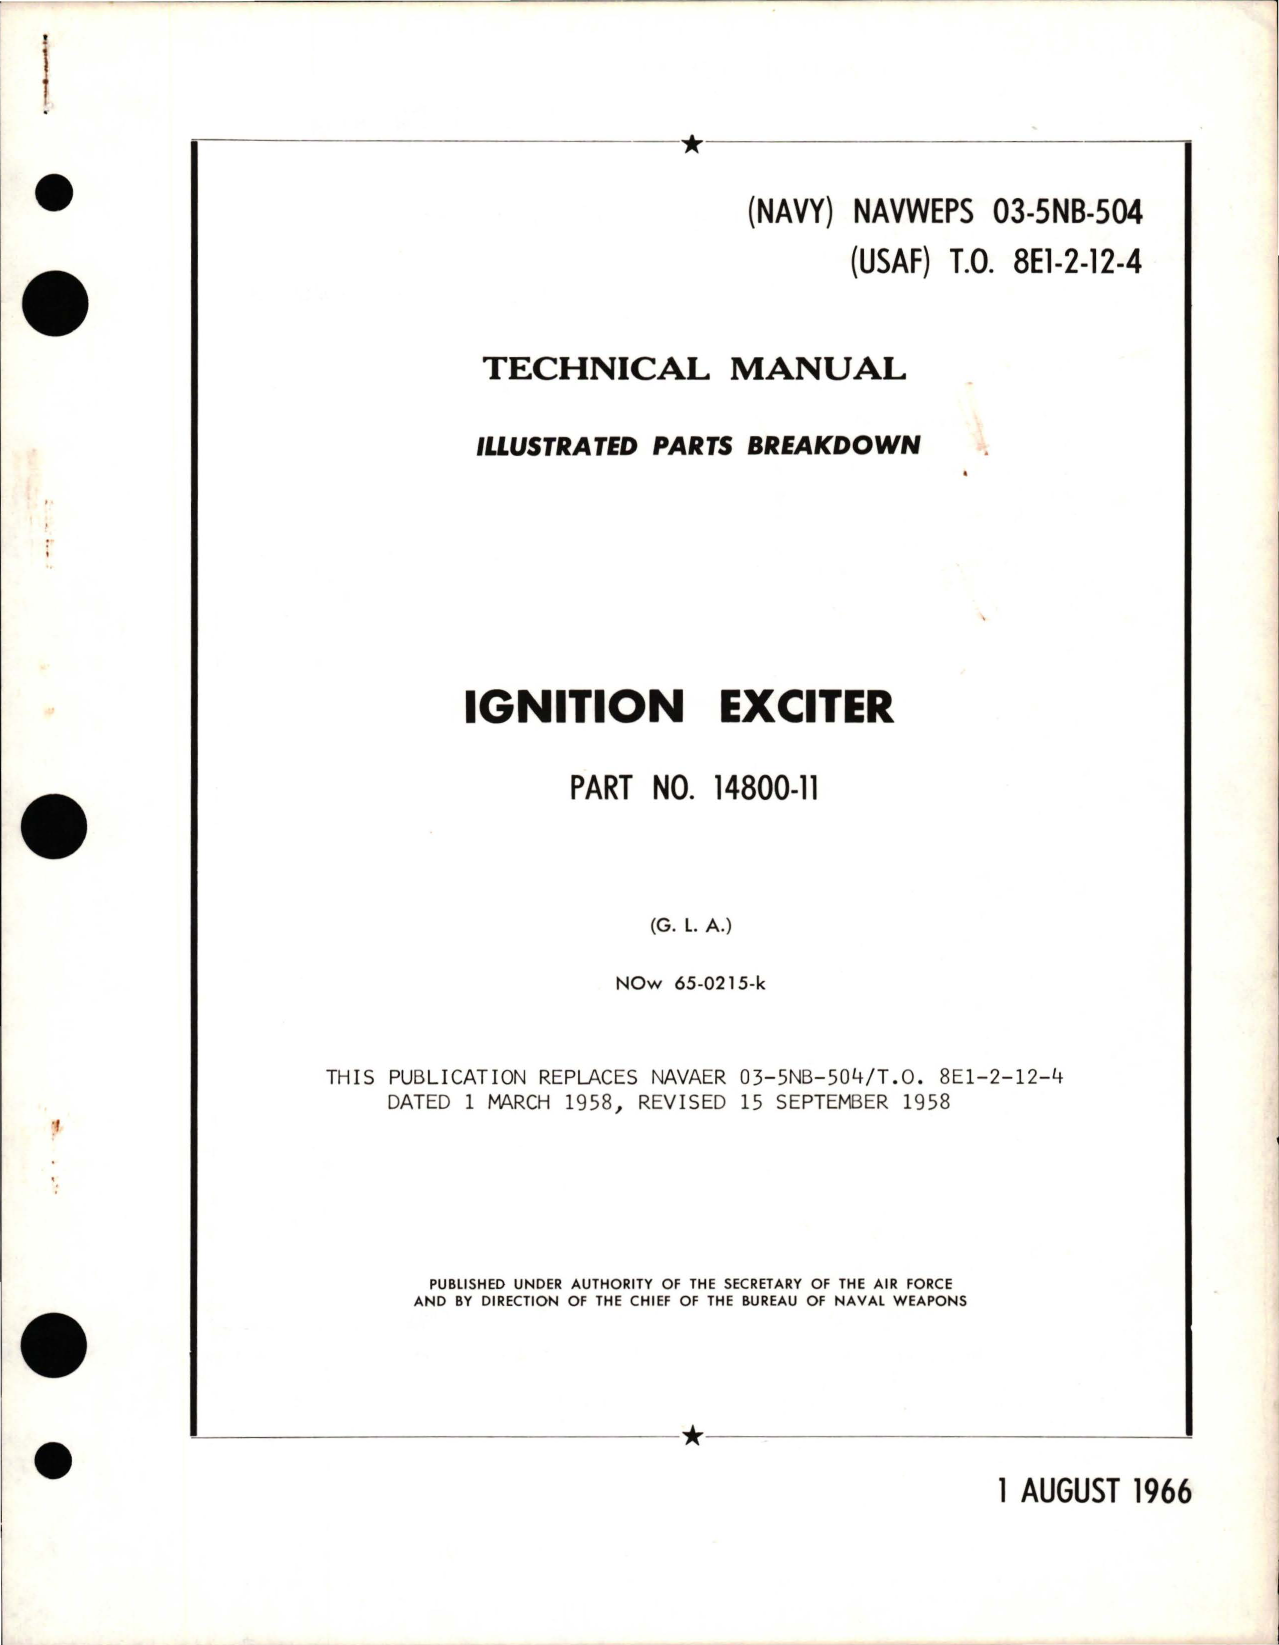 Sample page 1 from AirCorps Library document: Illustrated Parts Breakdown for Ignition Exciter - Part 14800-11 